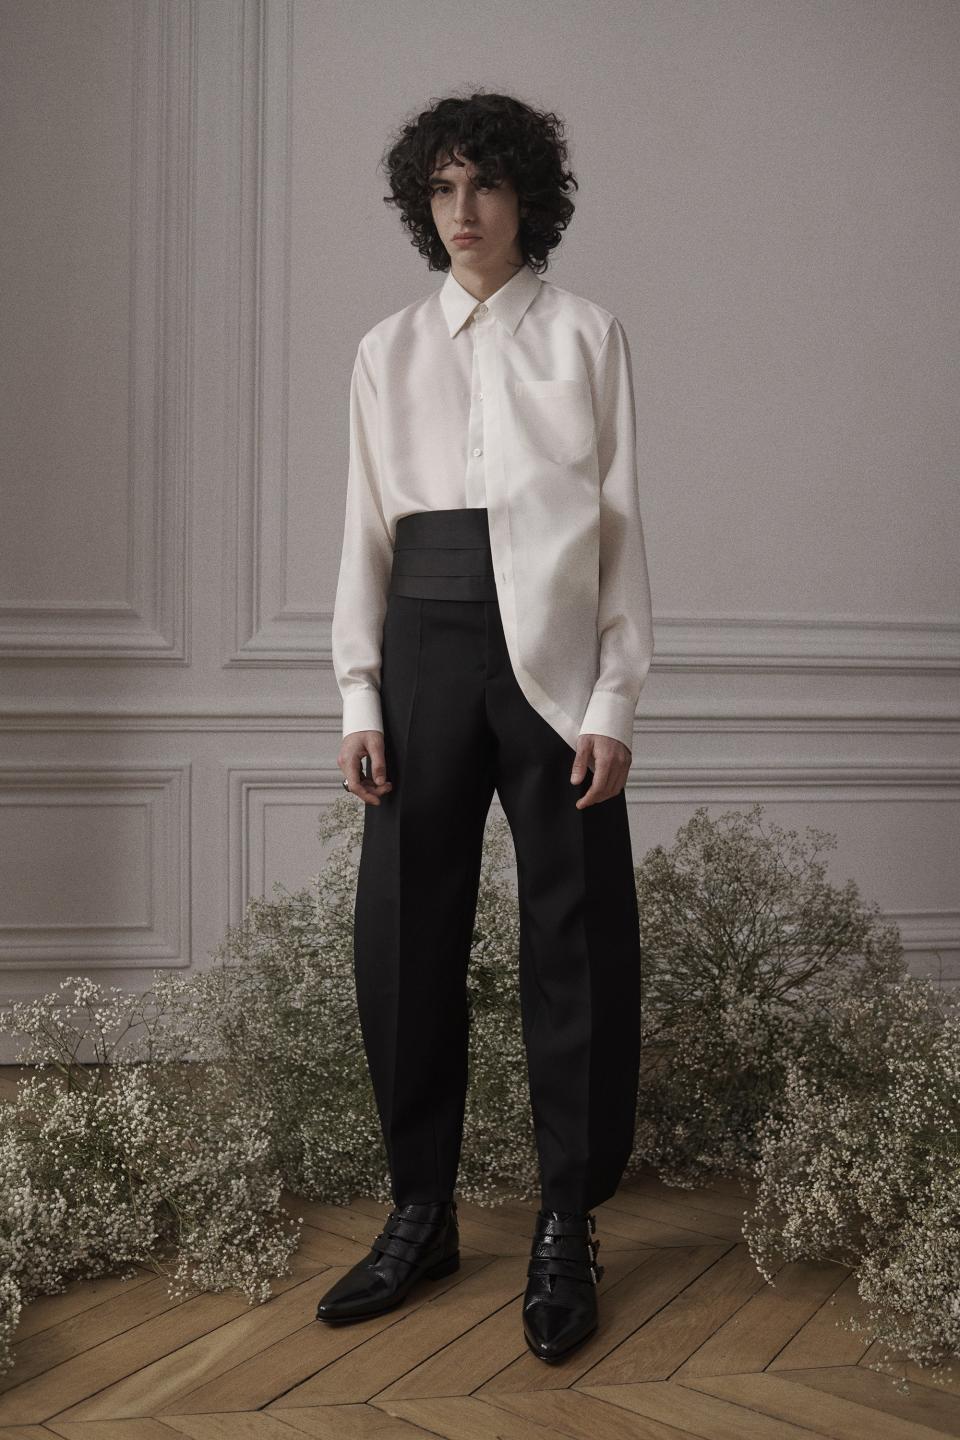 At Clare Waight Keller’s Givenchy menswear debut, expect ’70s-seen-through-the-’90s silhouettes and a new dandified elegance.